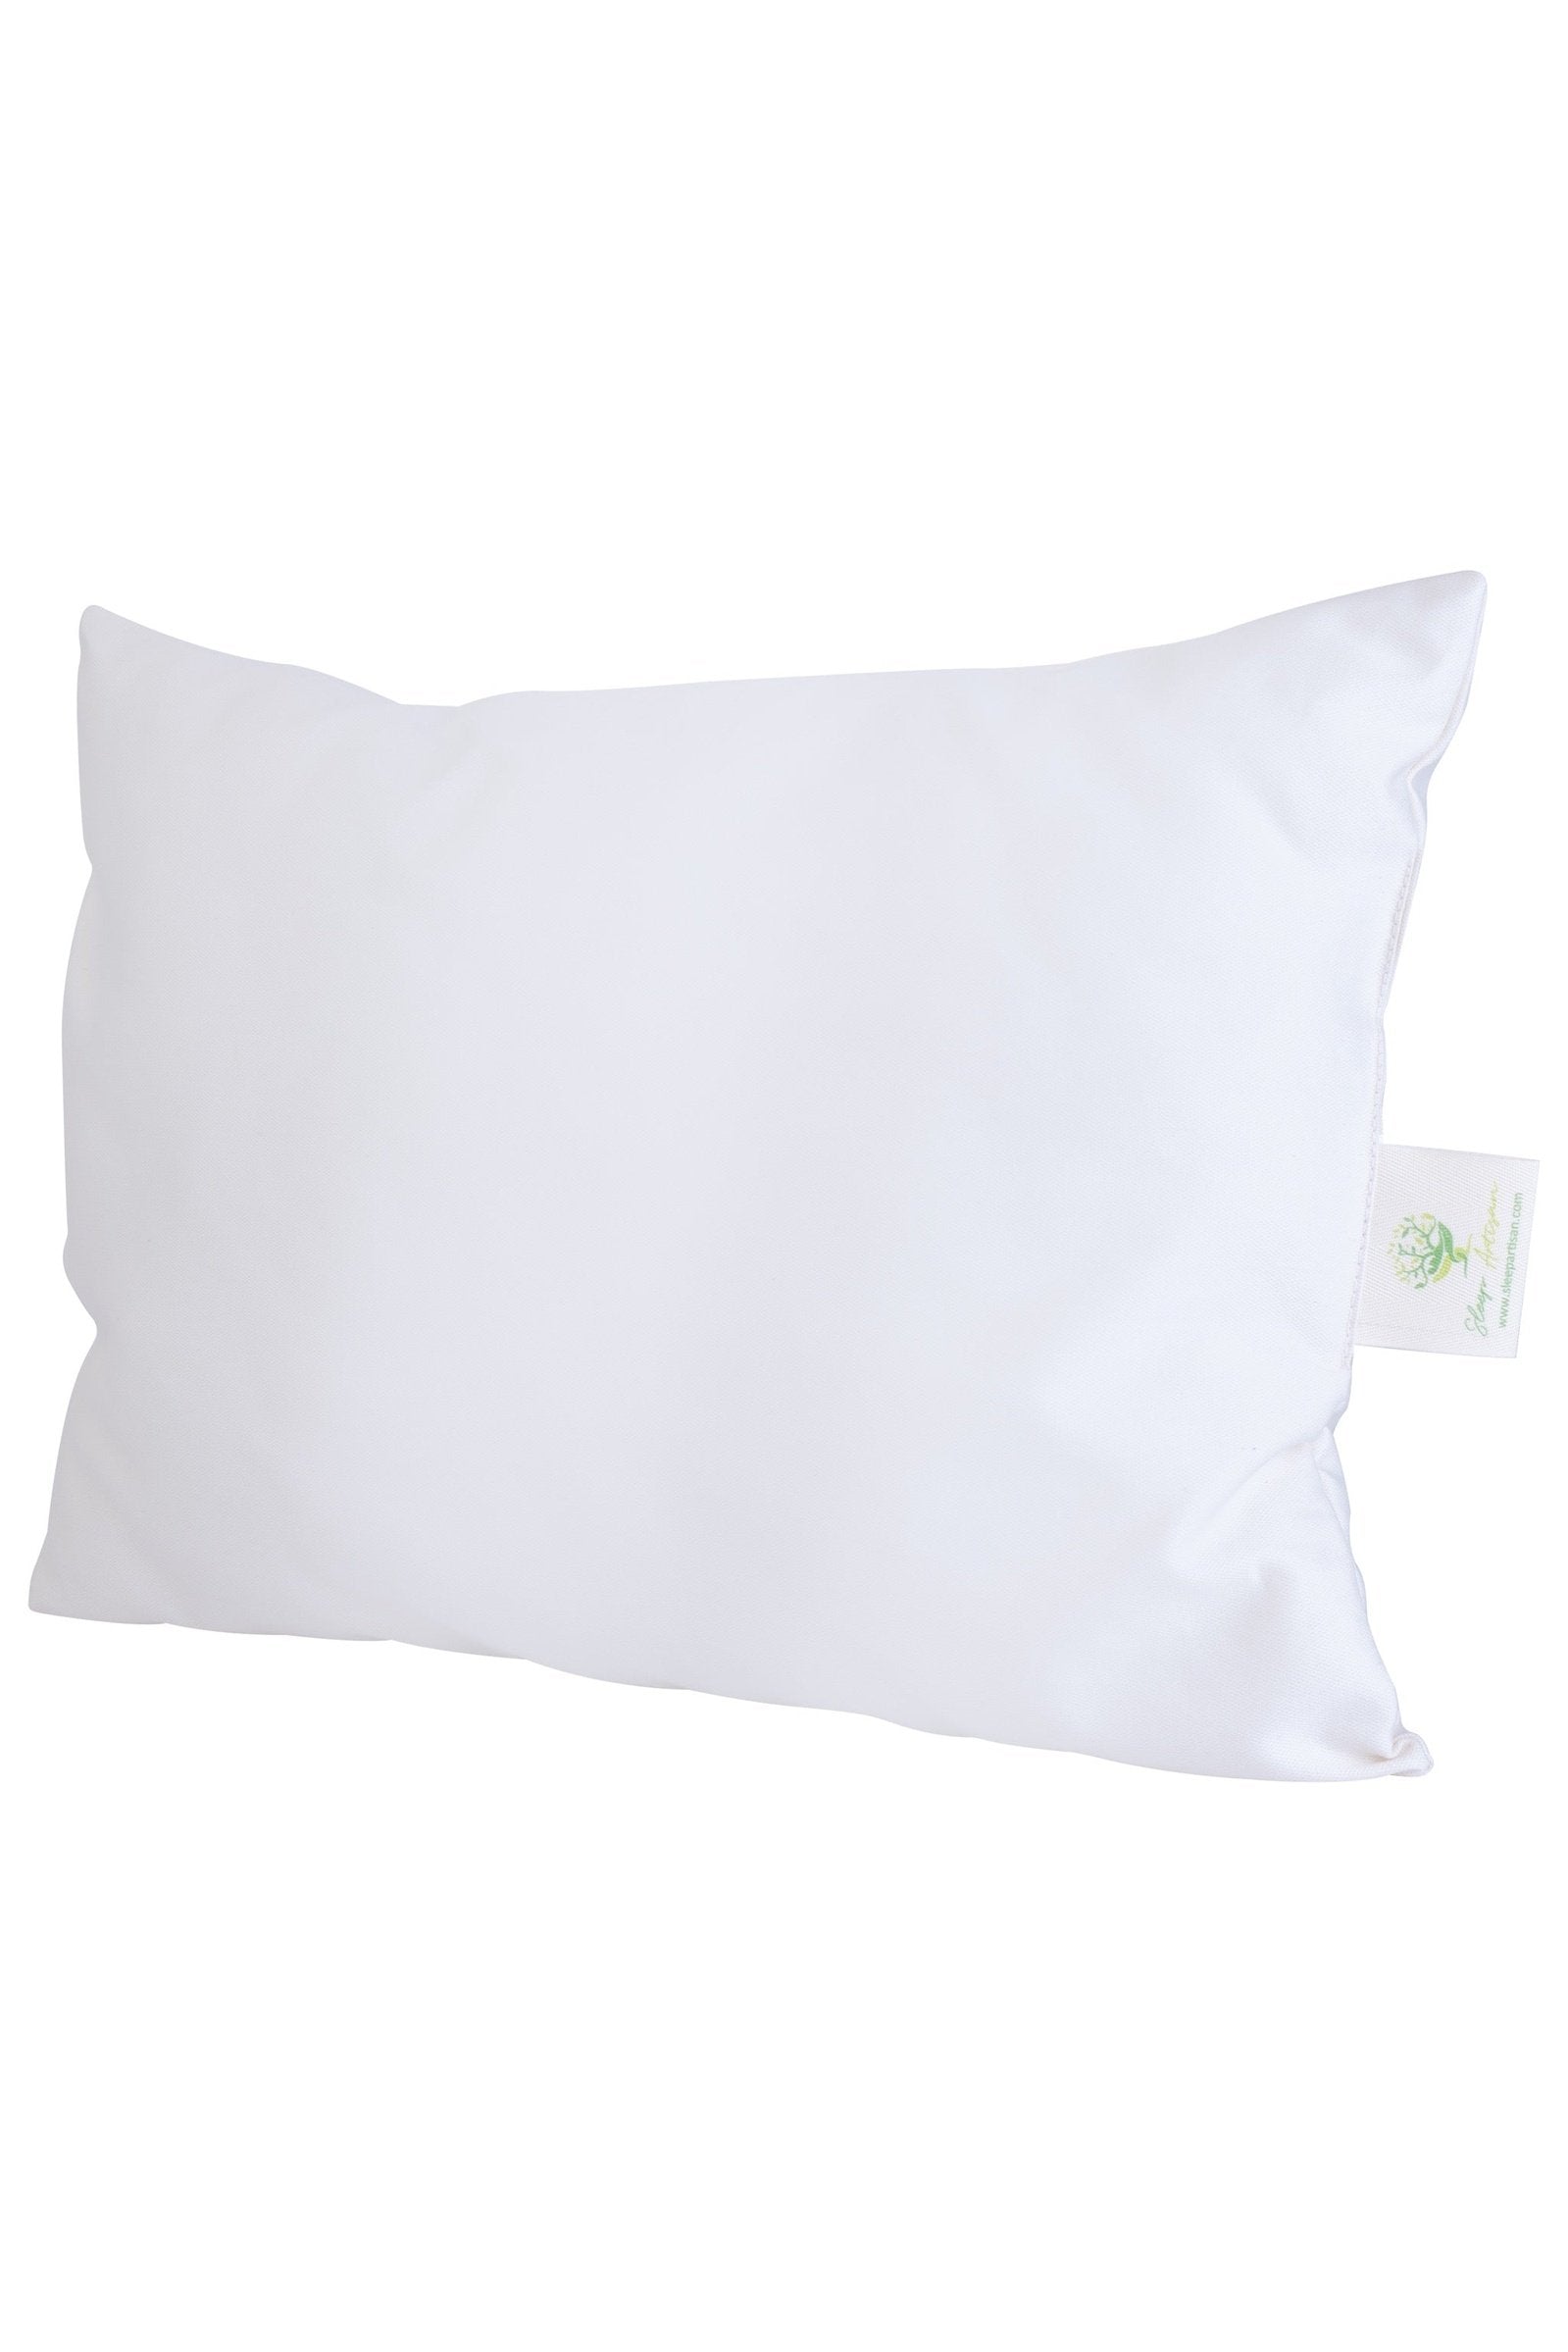 Organic Cotton Cover Toddler Pillow - Small Pillow for Travel - Made in USA